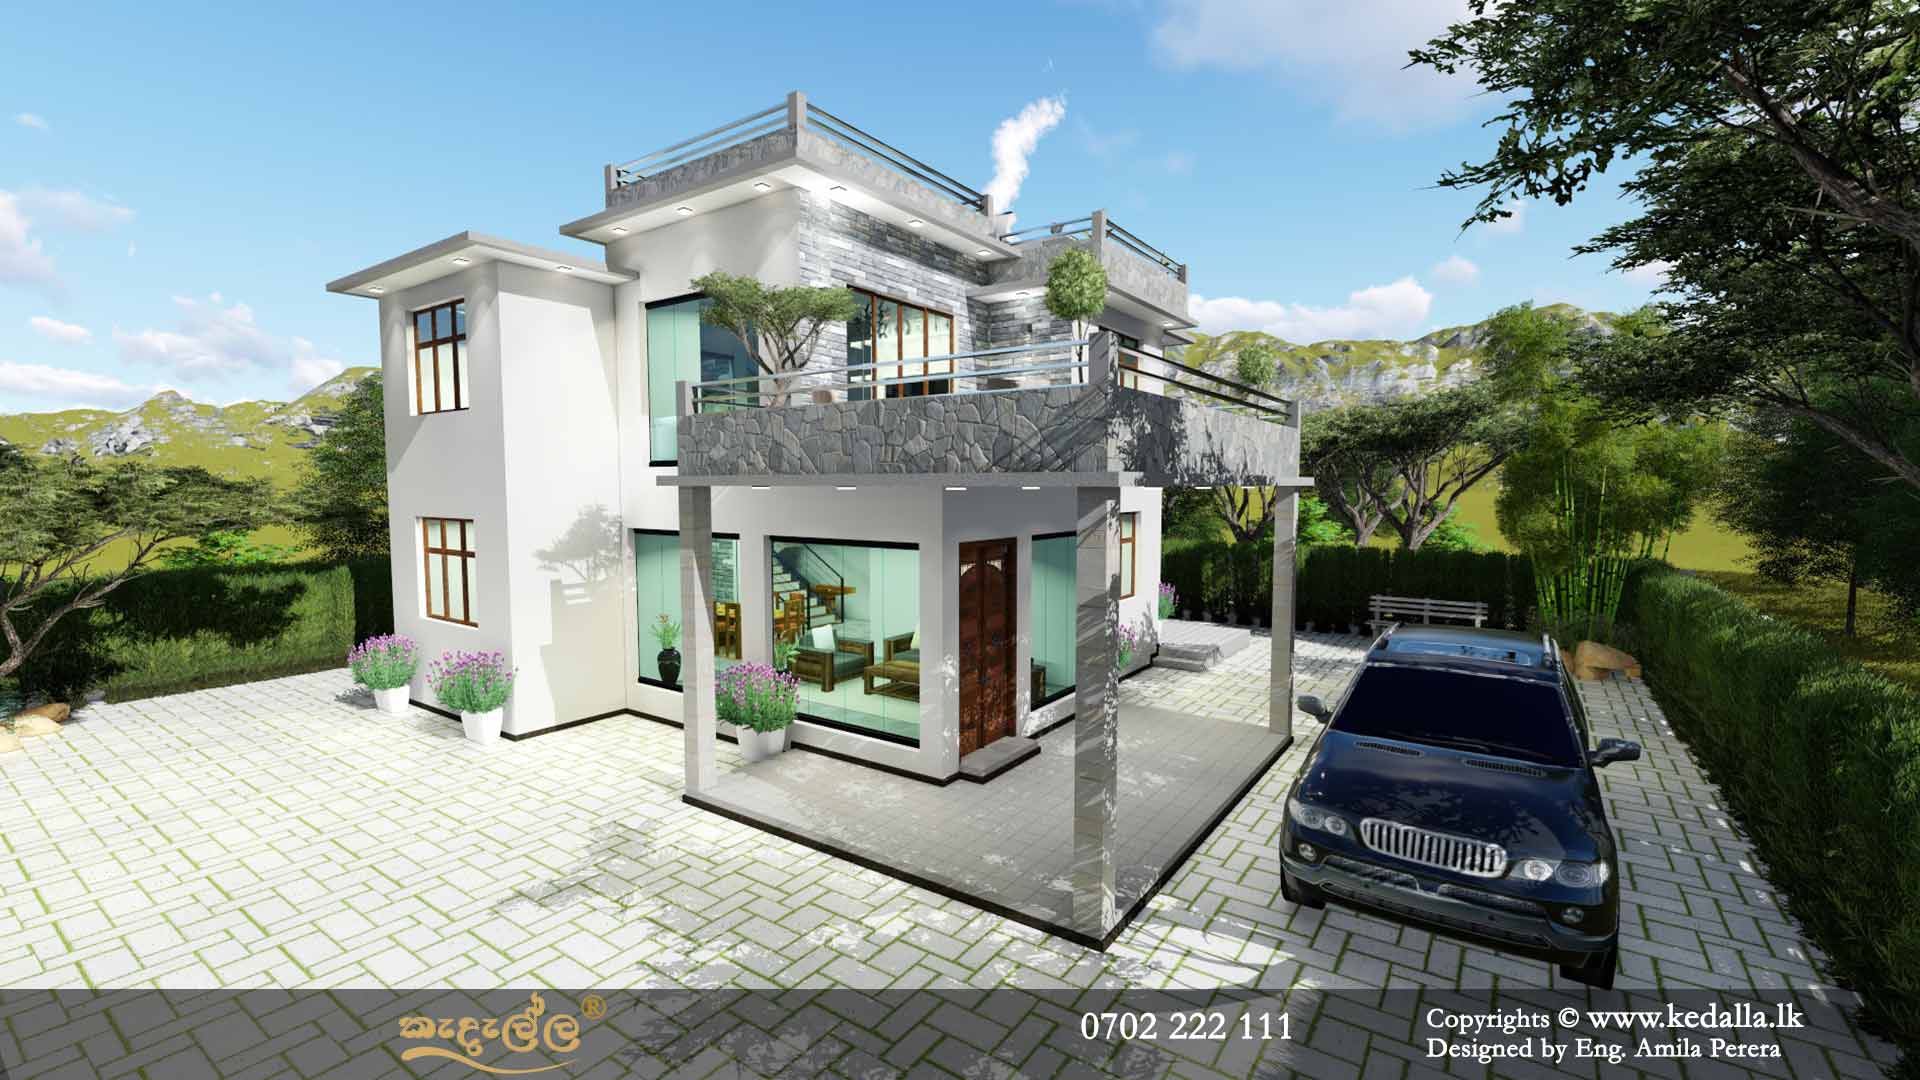 Kedalla Architectural Design Firm is the best architectural service provider in Matale and surrounding area